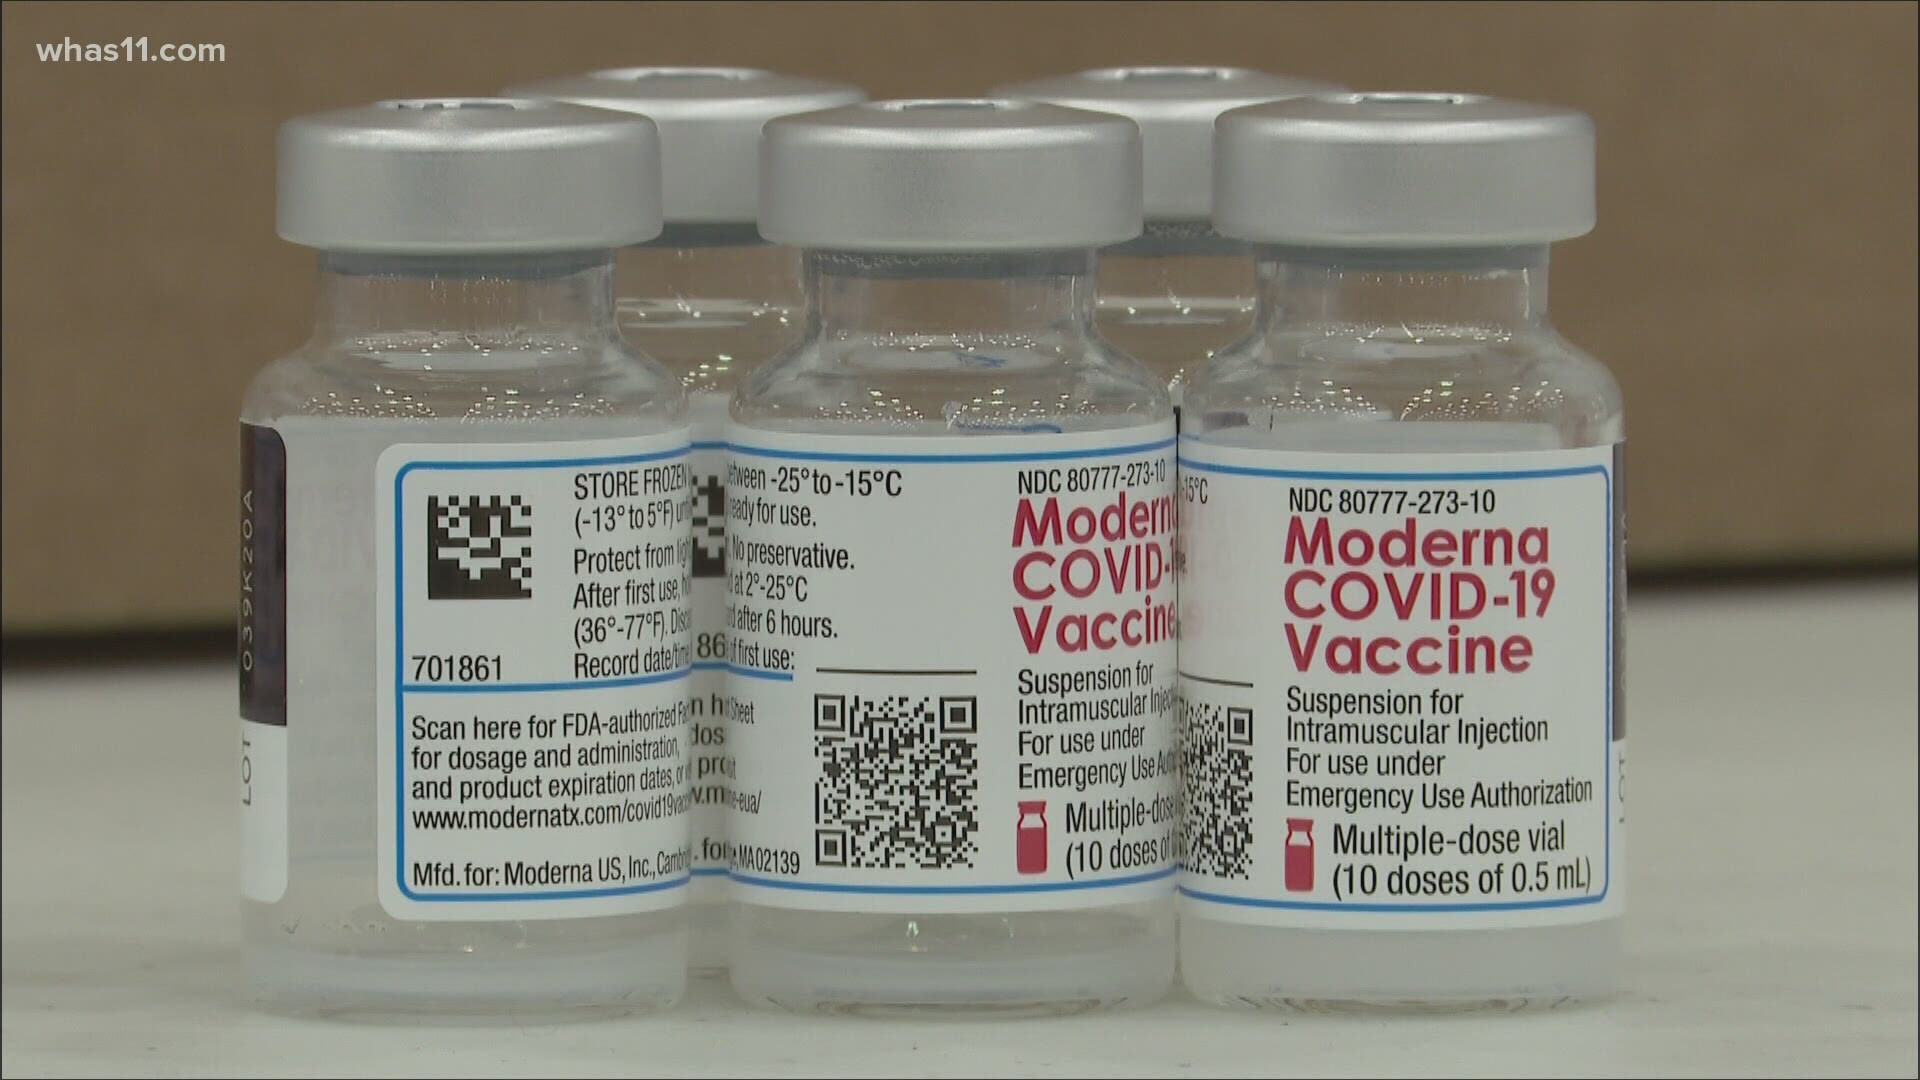 From Amazon gift cards to cash, businesses around Kentucky are finding creative ways to encourage vaccination among their employees.